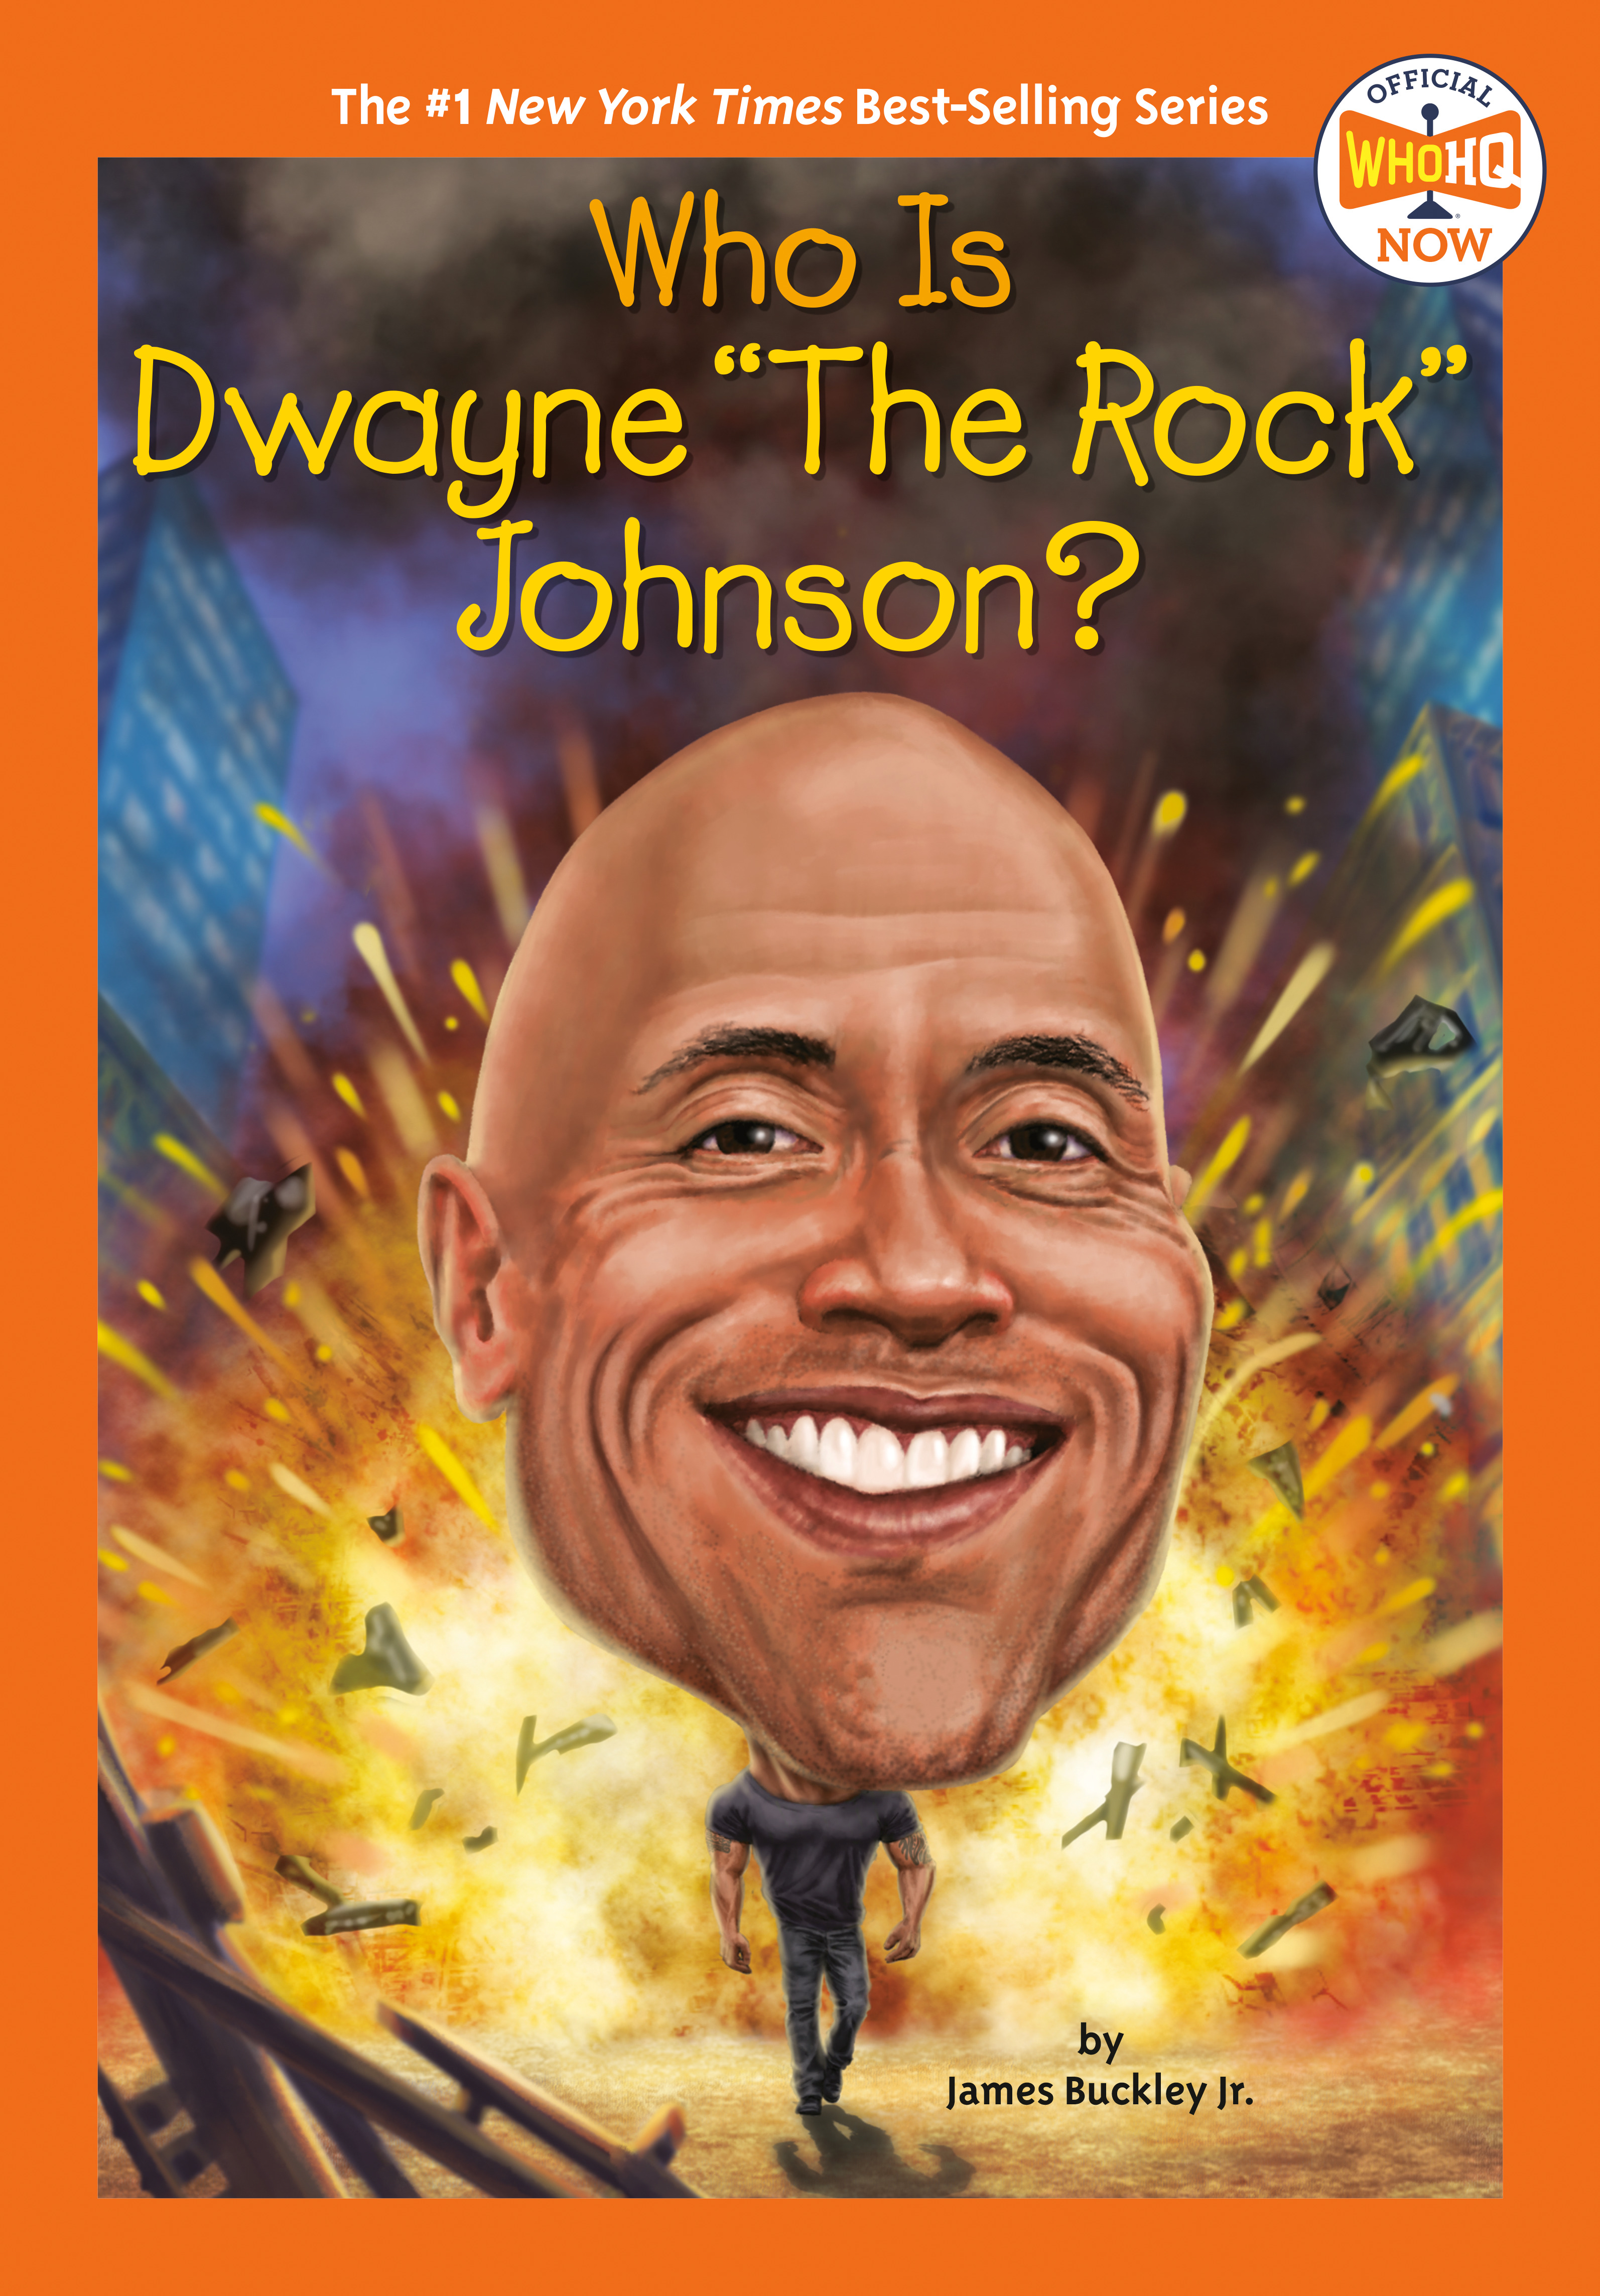 Who Is Dwayne "The Rock" Johnson? | Buckley, James